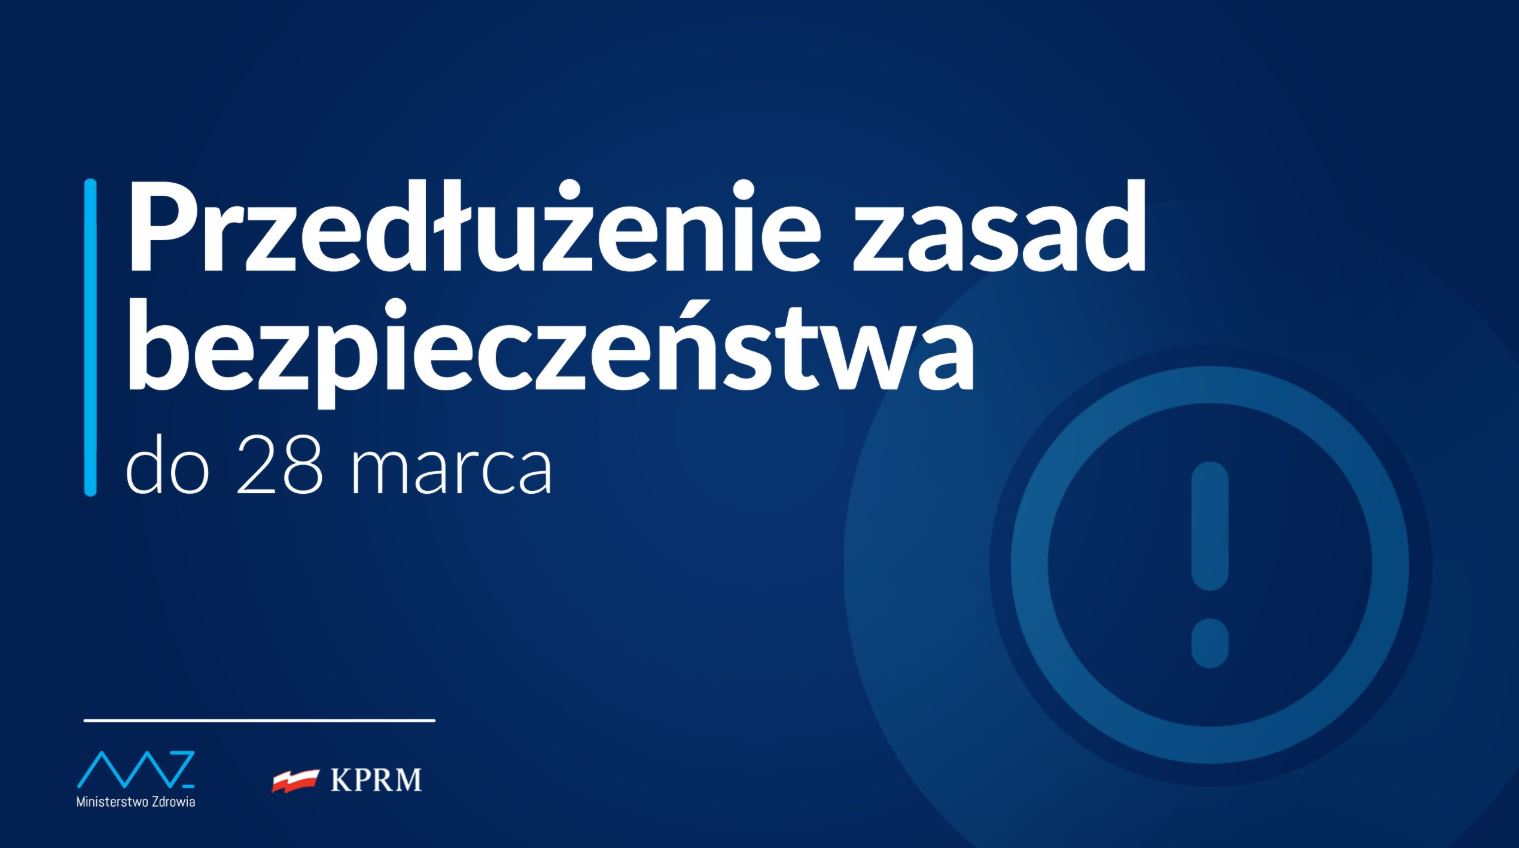 Covid-19 measures in Poland from 13 March